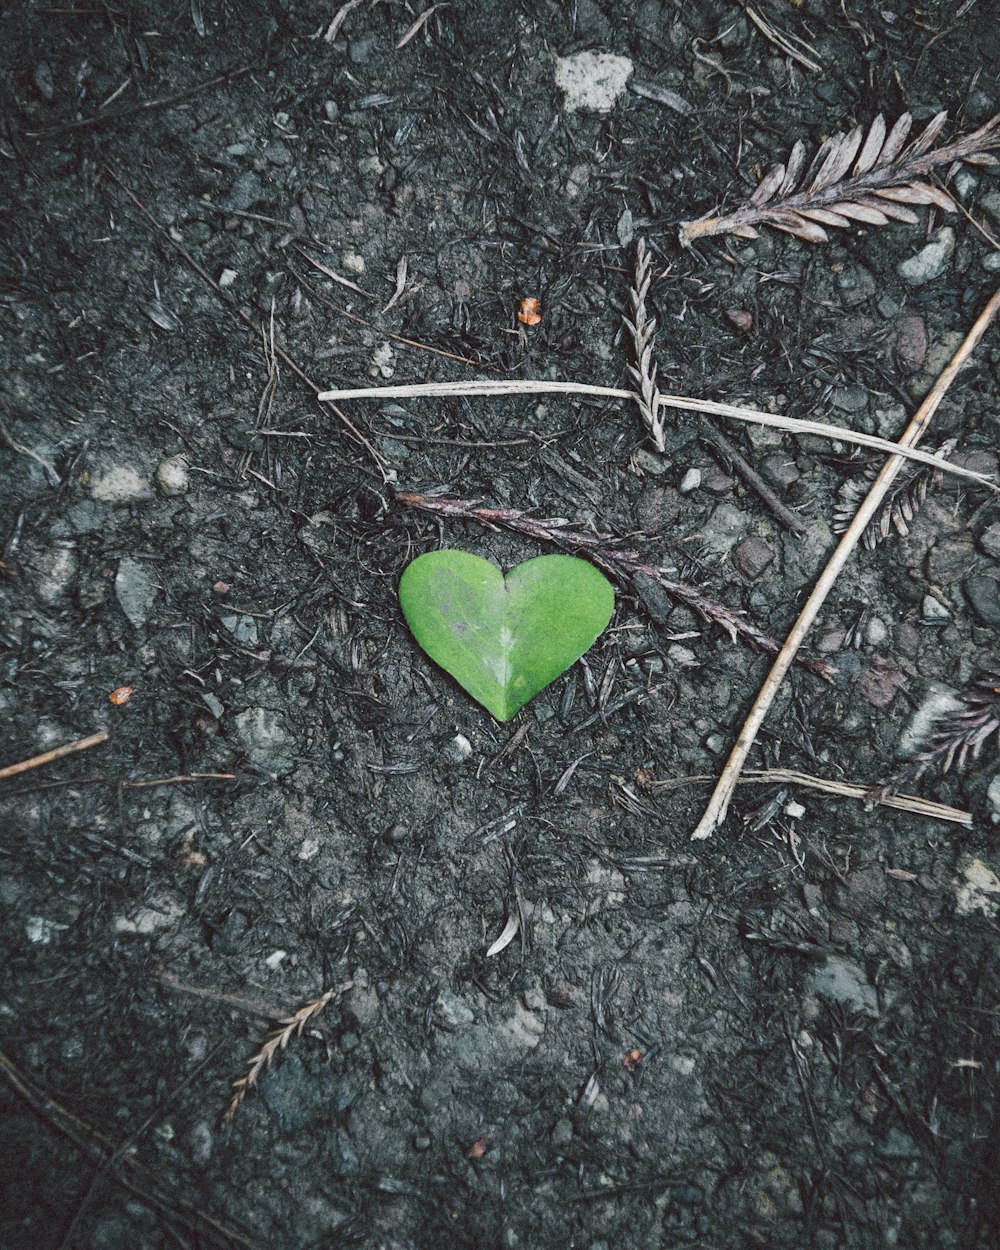 a green heart shaped object on the ground